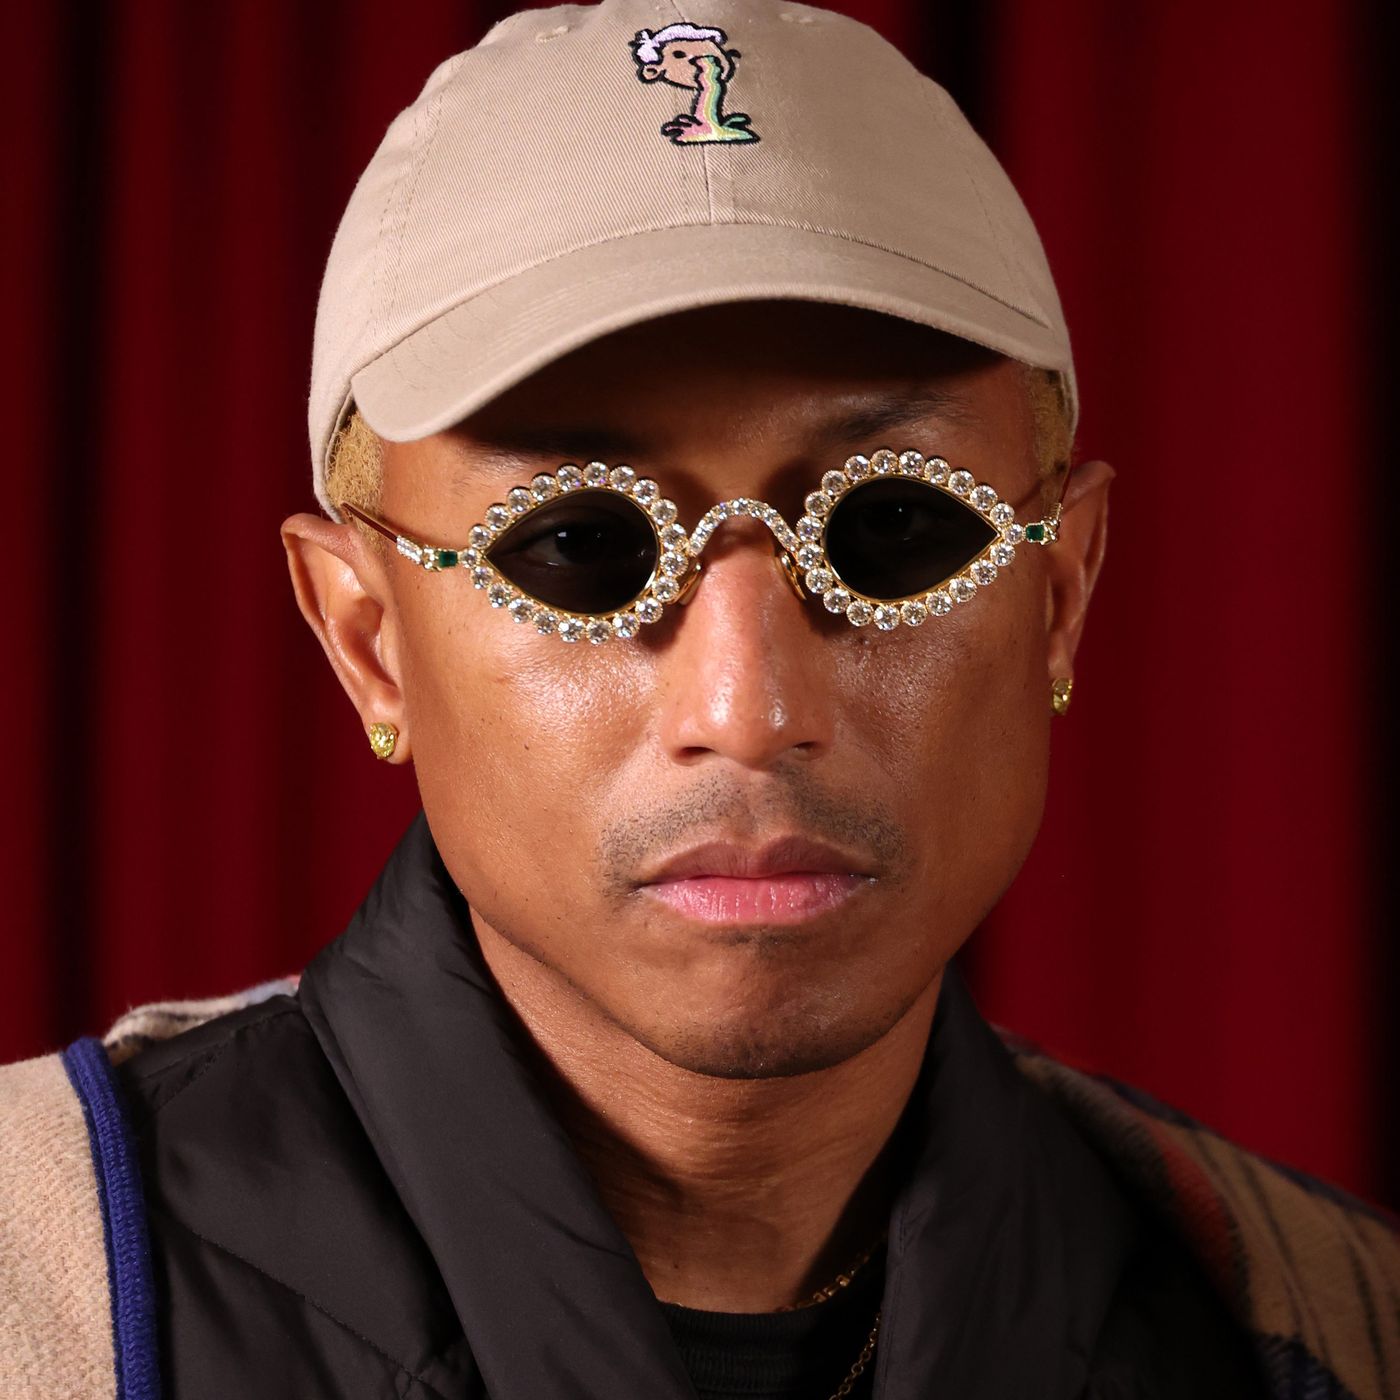 Pharrell Is Taking Over Louis Vuitton. Here's What We Know So Far